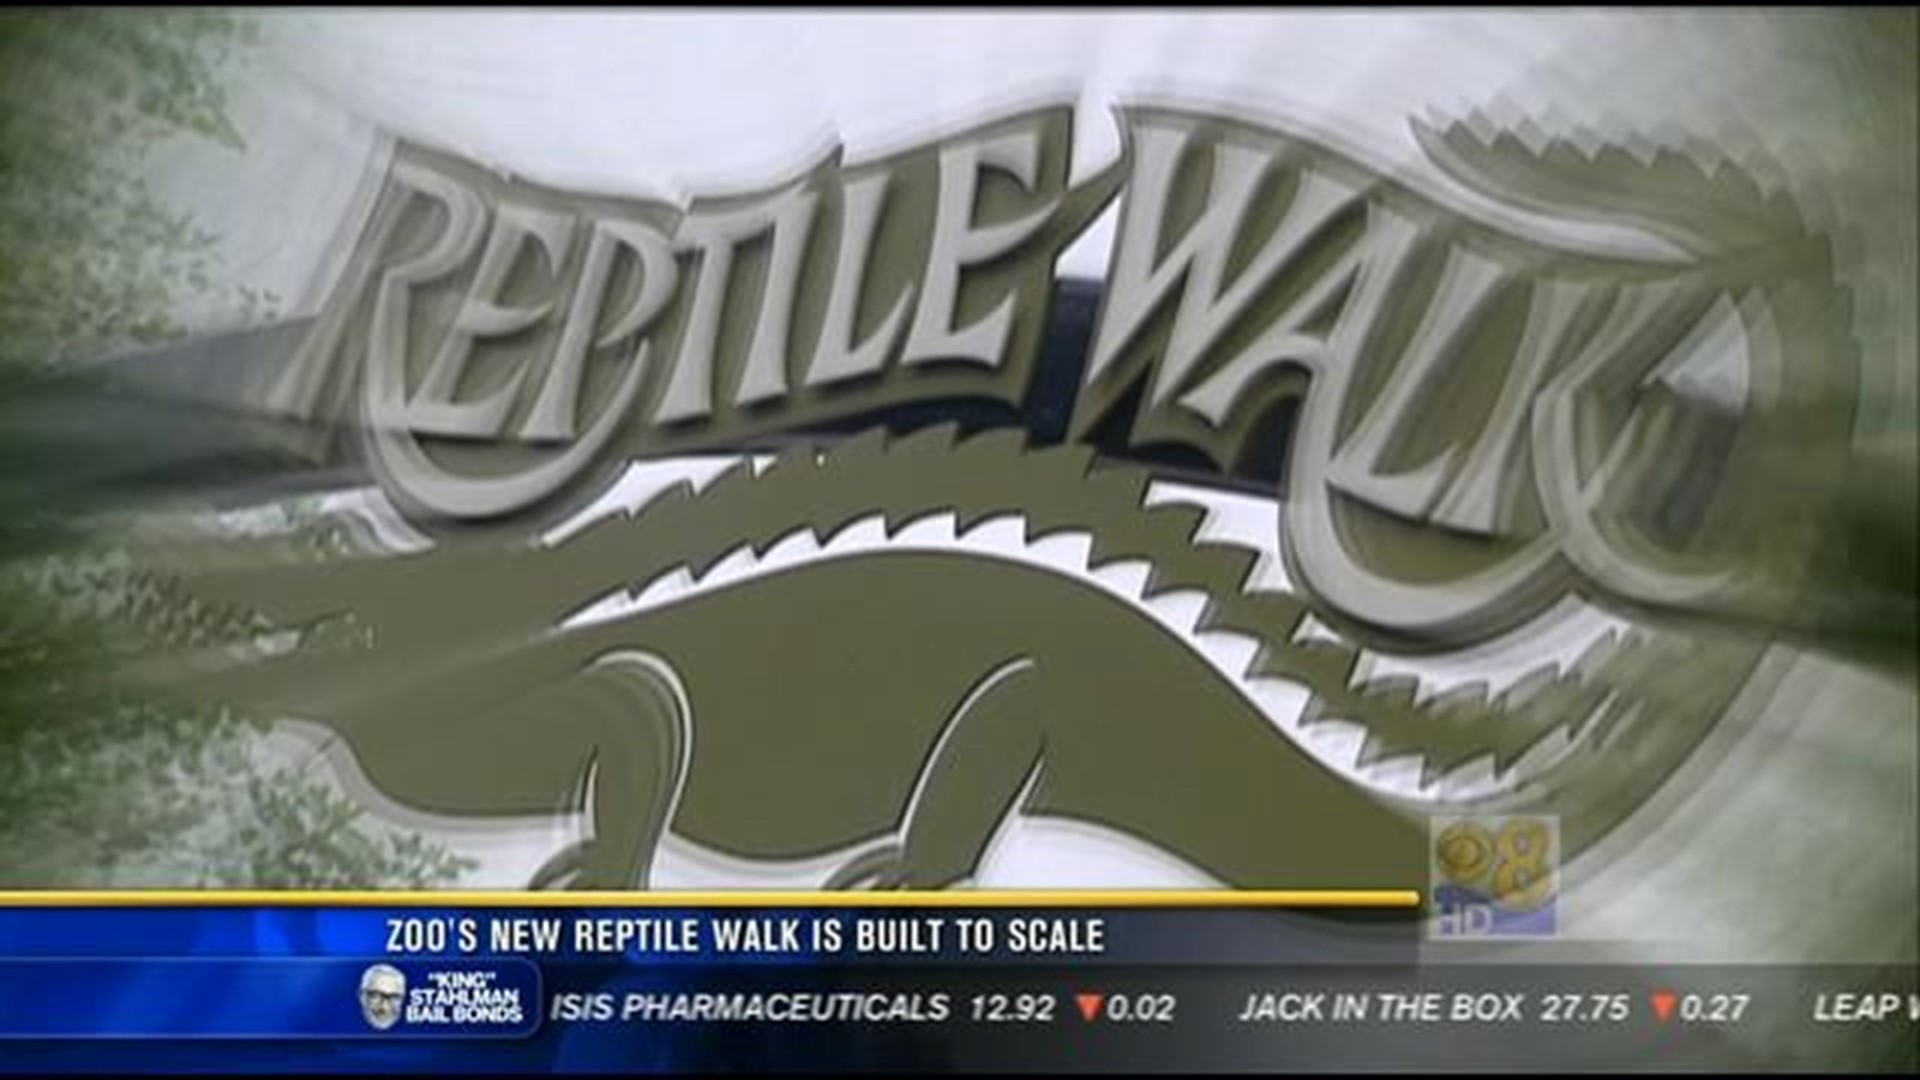 San Diego Zoo's new Reptile Walk is built to scale